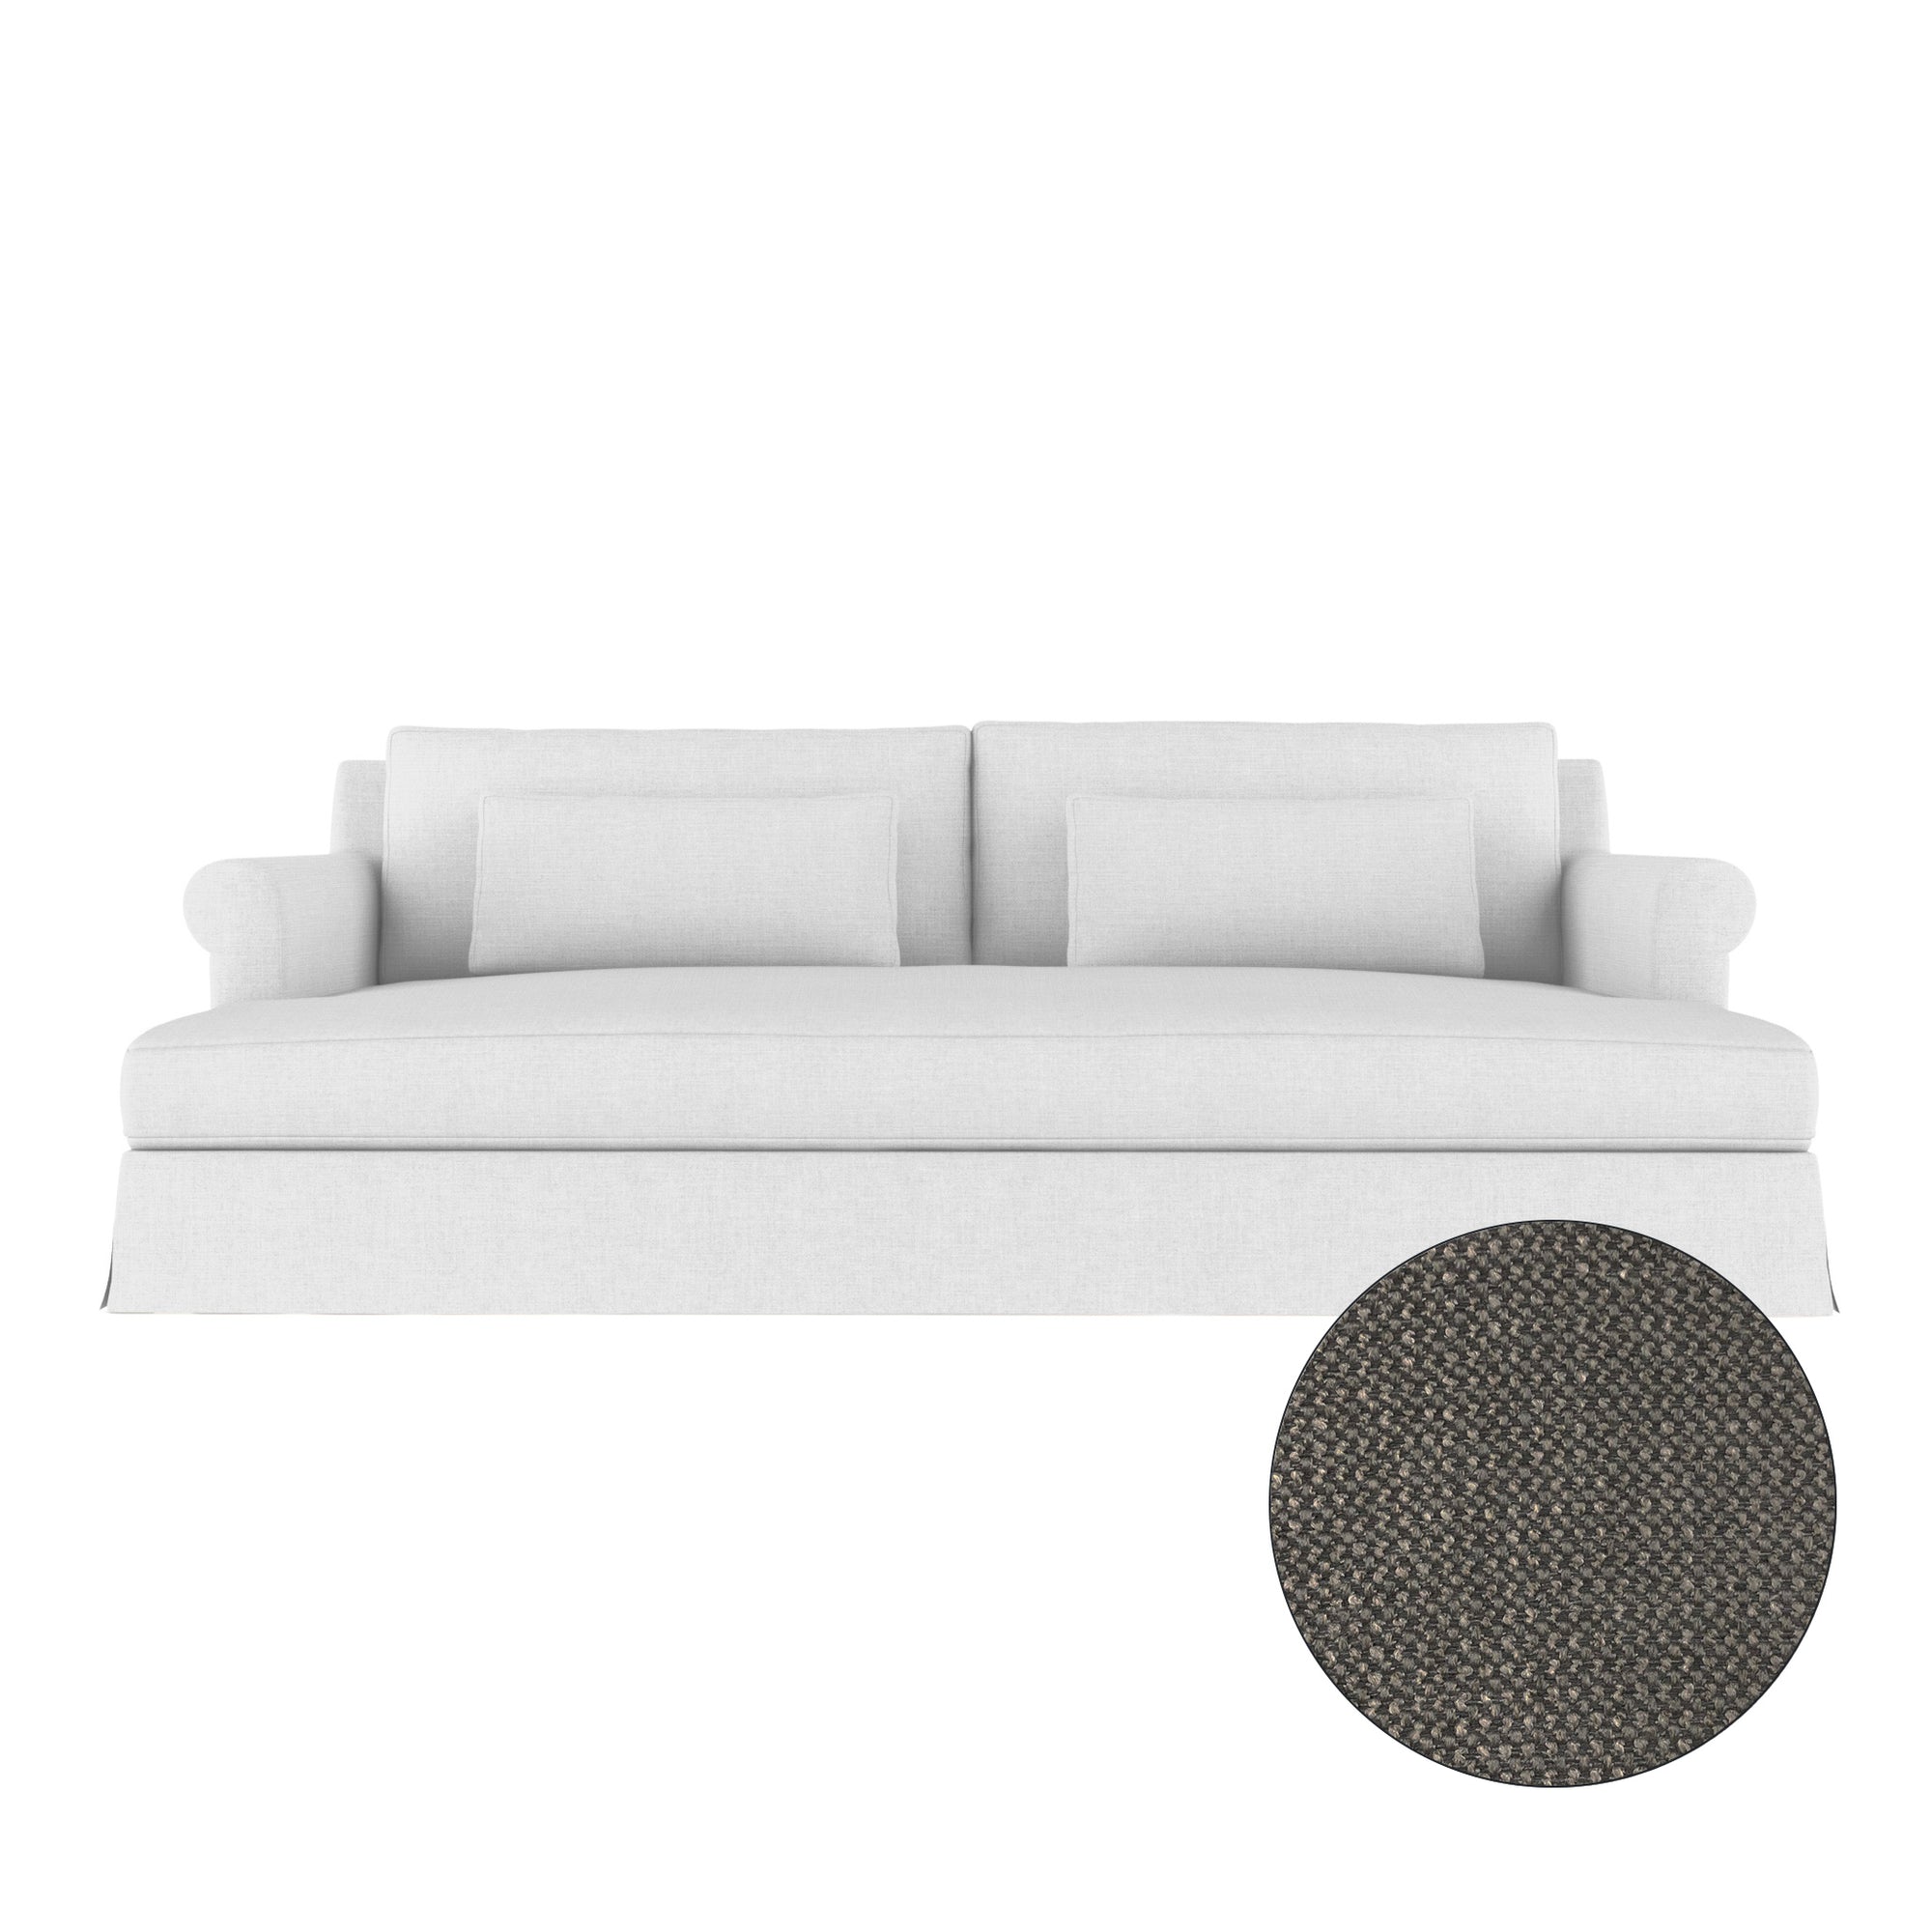 Ludlow Daybed - Graphite Basketweave